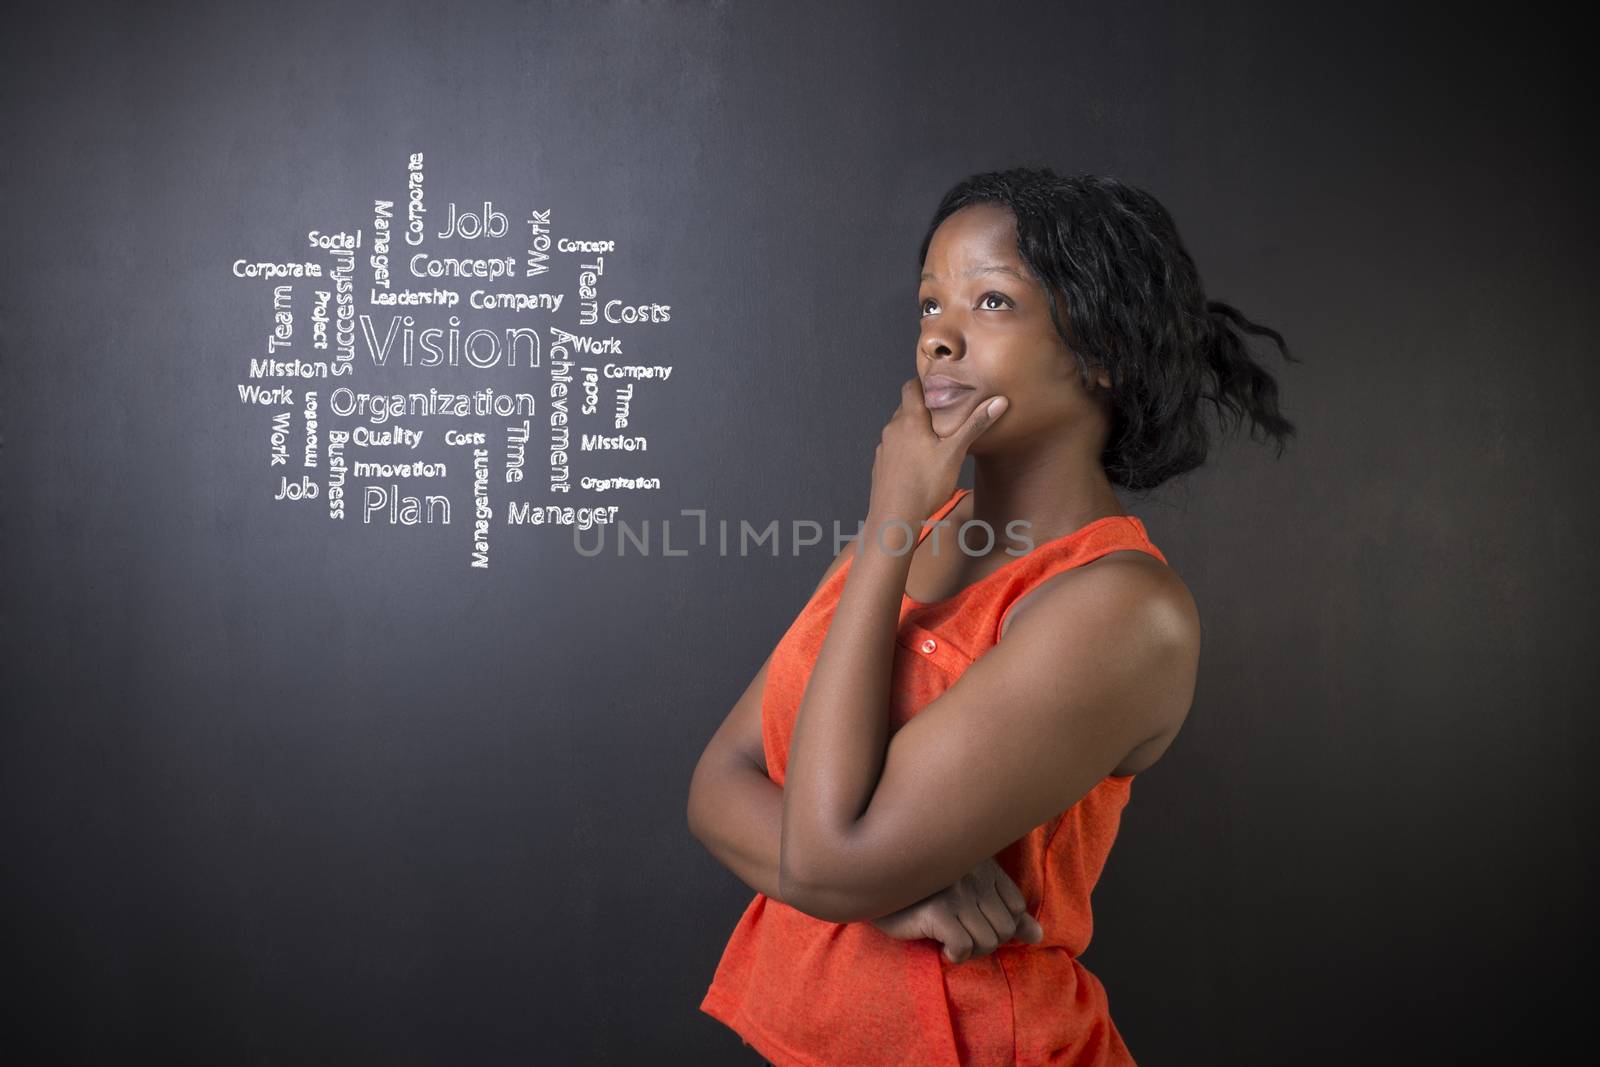 South African or African American woman teacher or student against blackboard background with chalk vision diagram